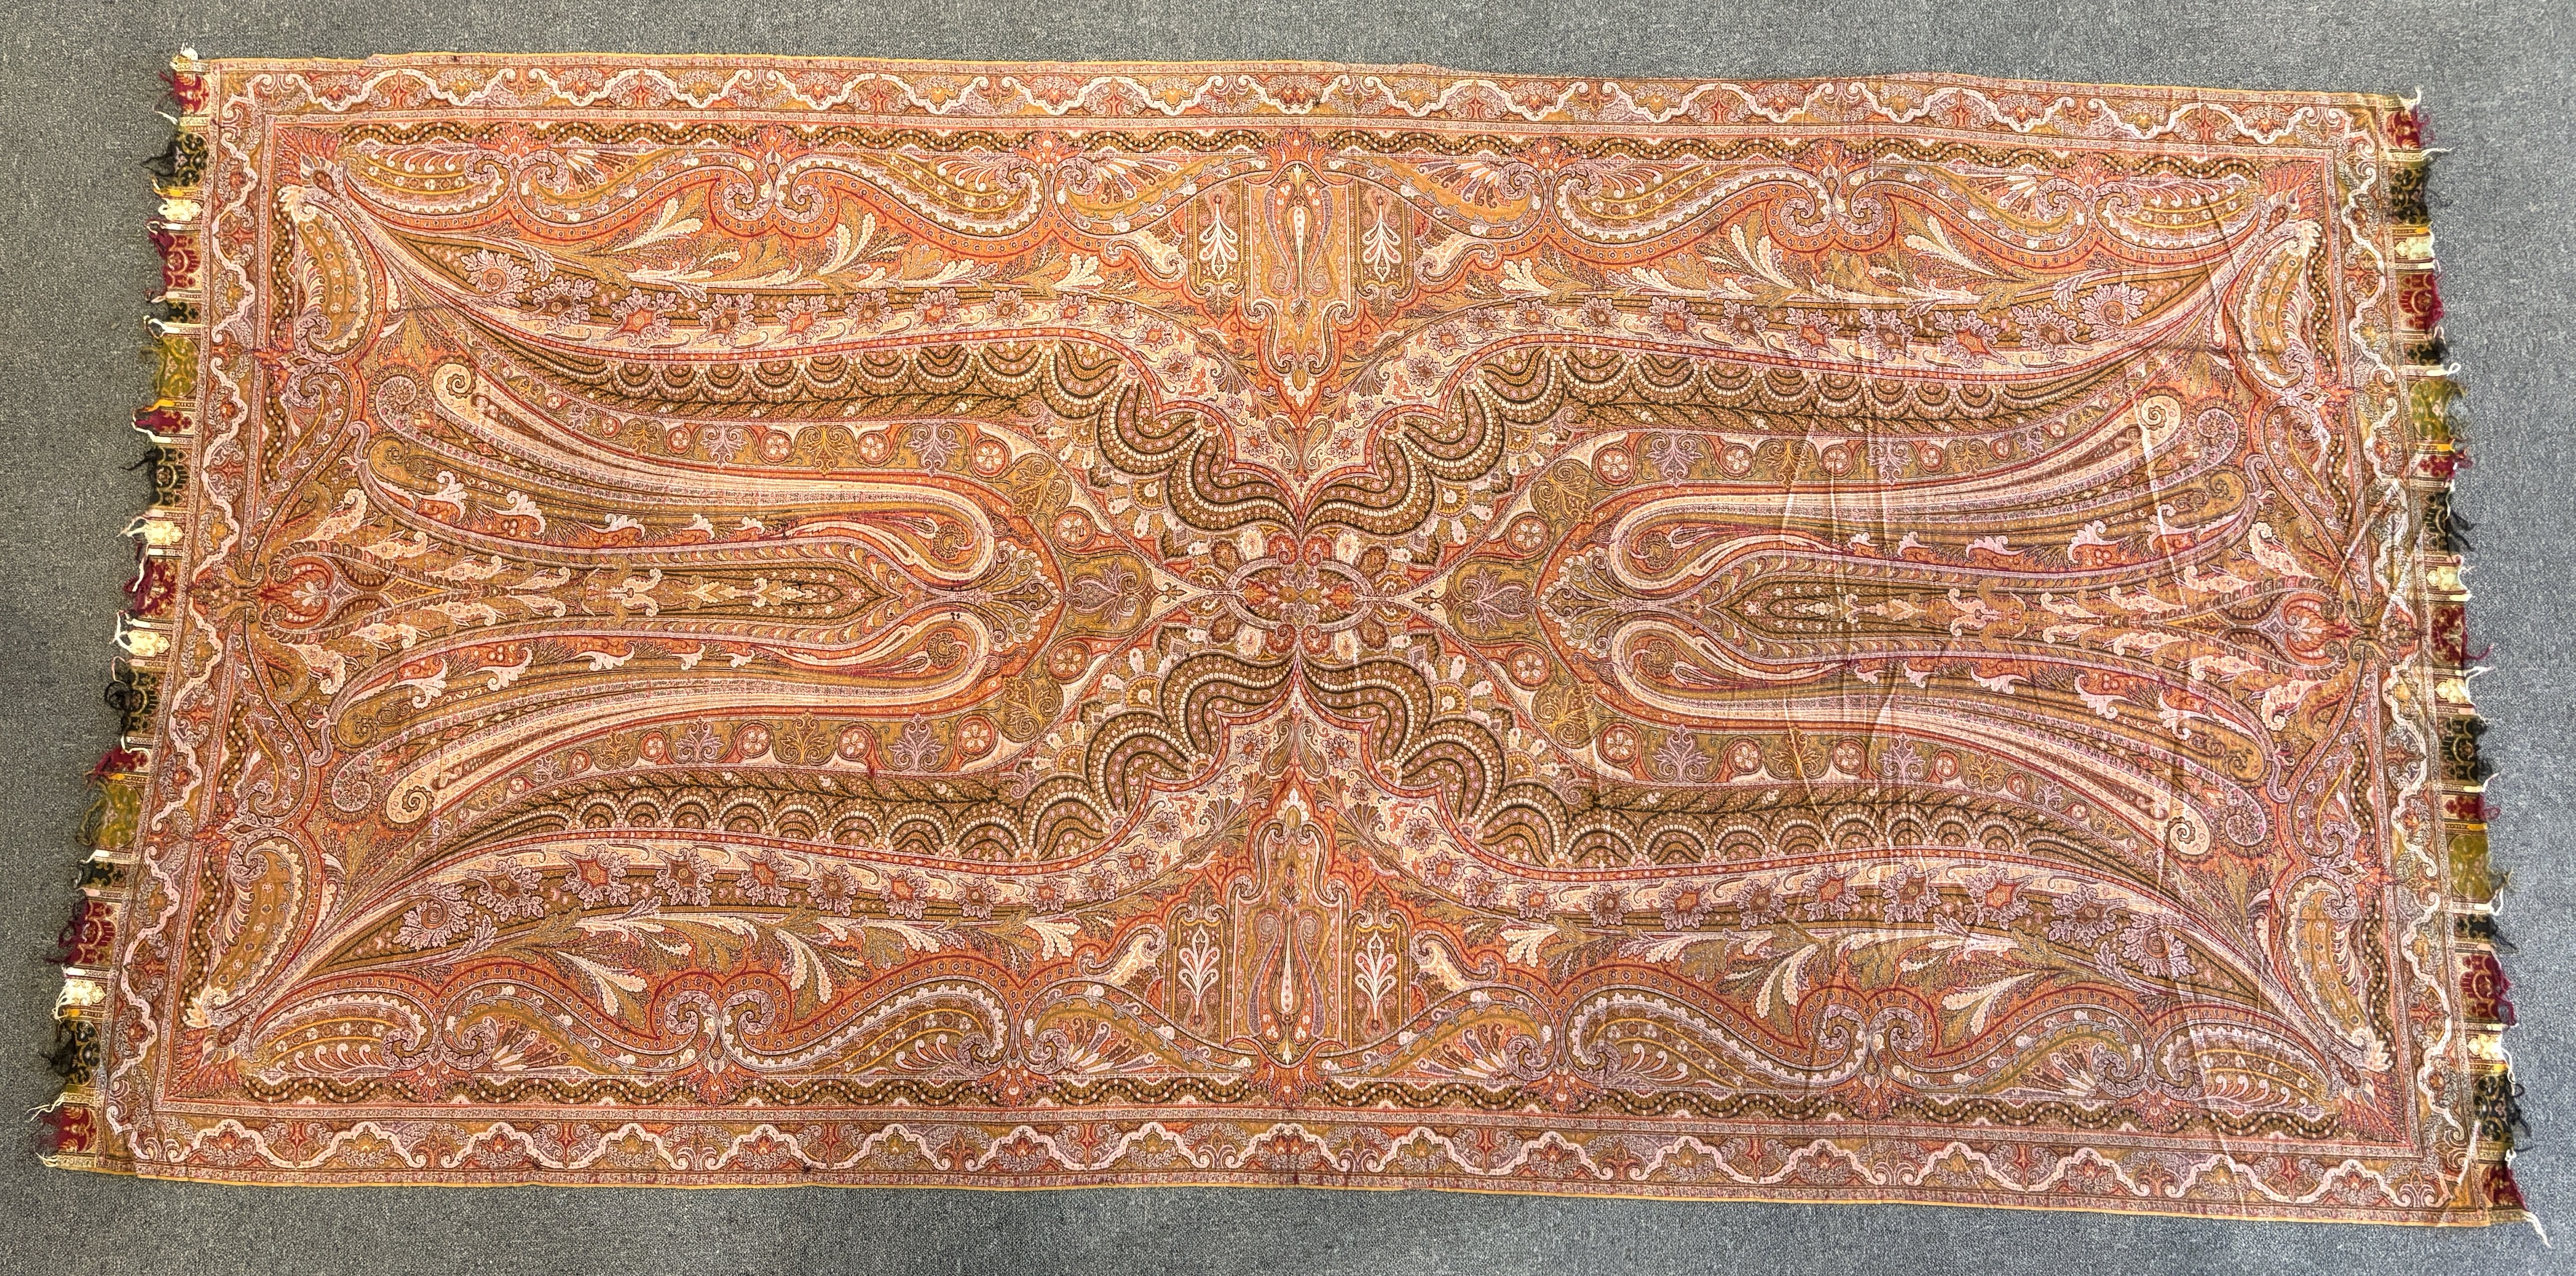 A 19th century woven Scottish Paisley wool shawl, bordered on four sides and fringed on two, woven with two ornate teardrop designs and a central cartouche, 334cm long x 160cm wide